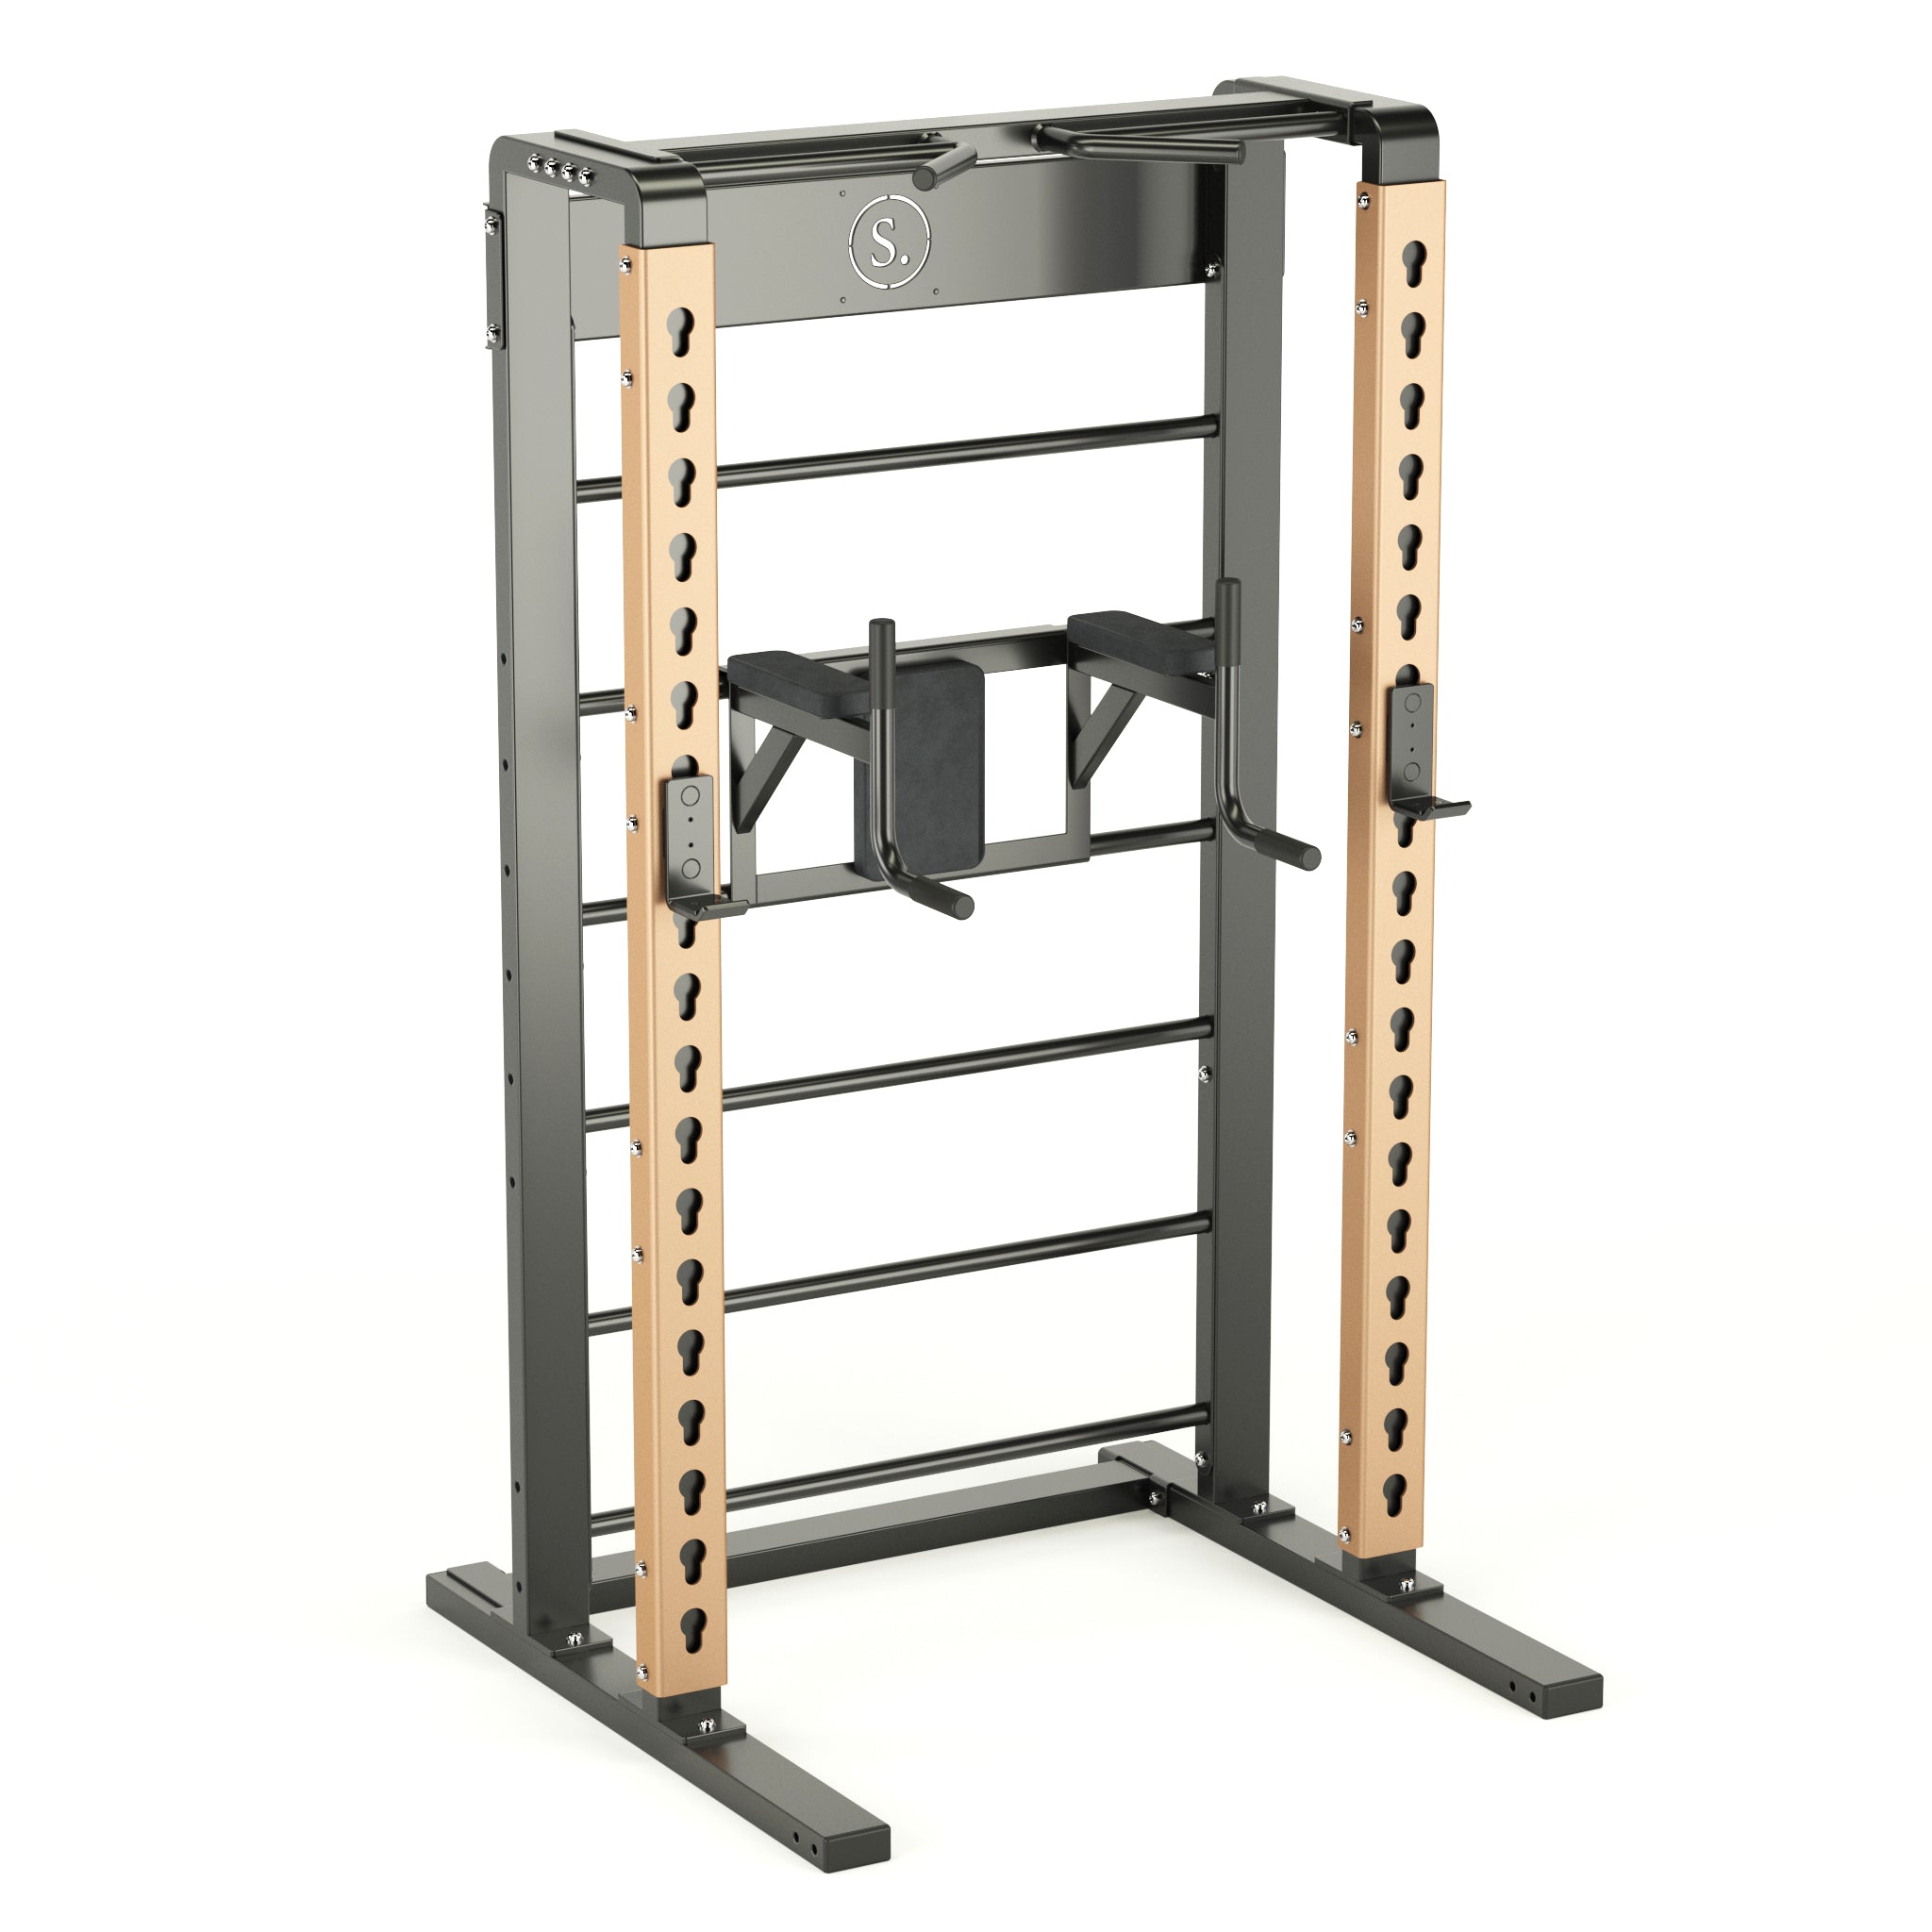 Solo Half Squat Rack with Wall Bars, Dip and Leg Raise